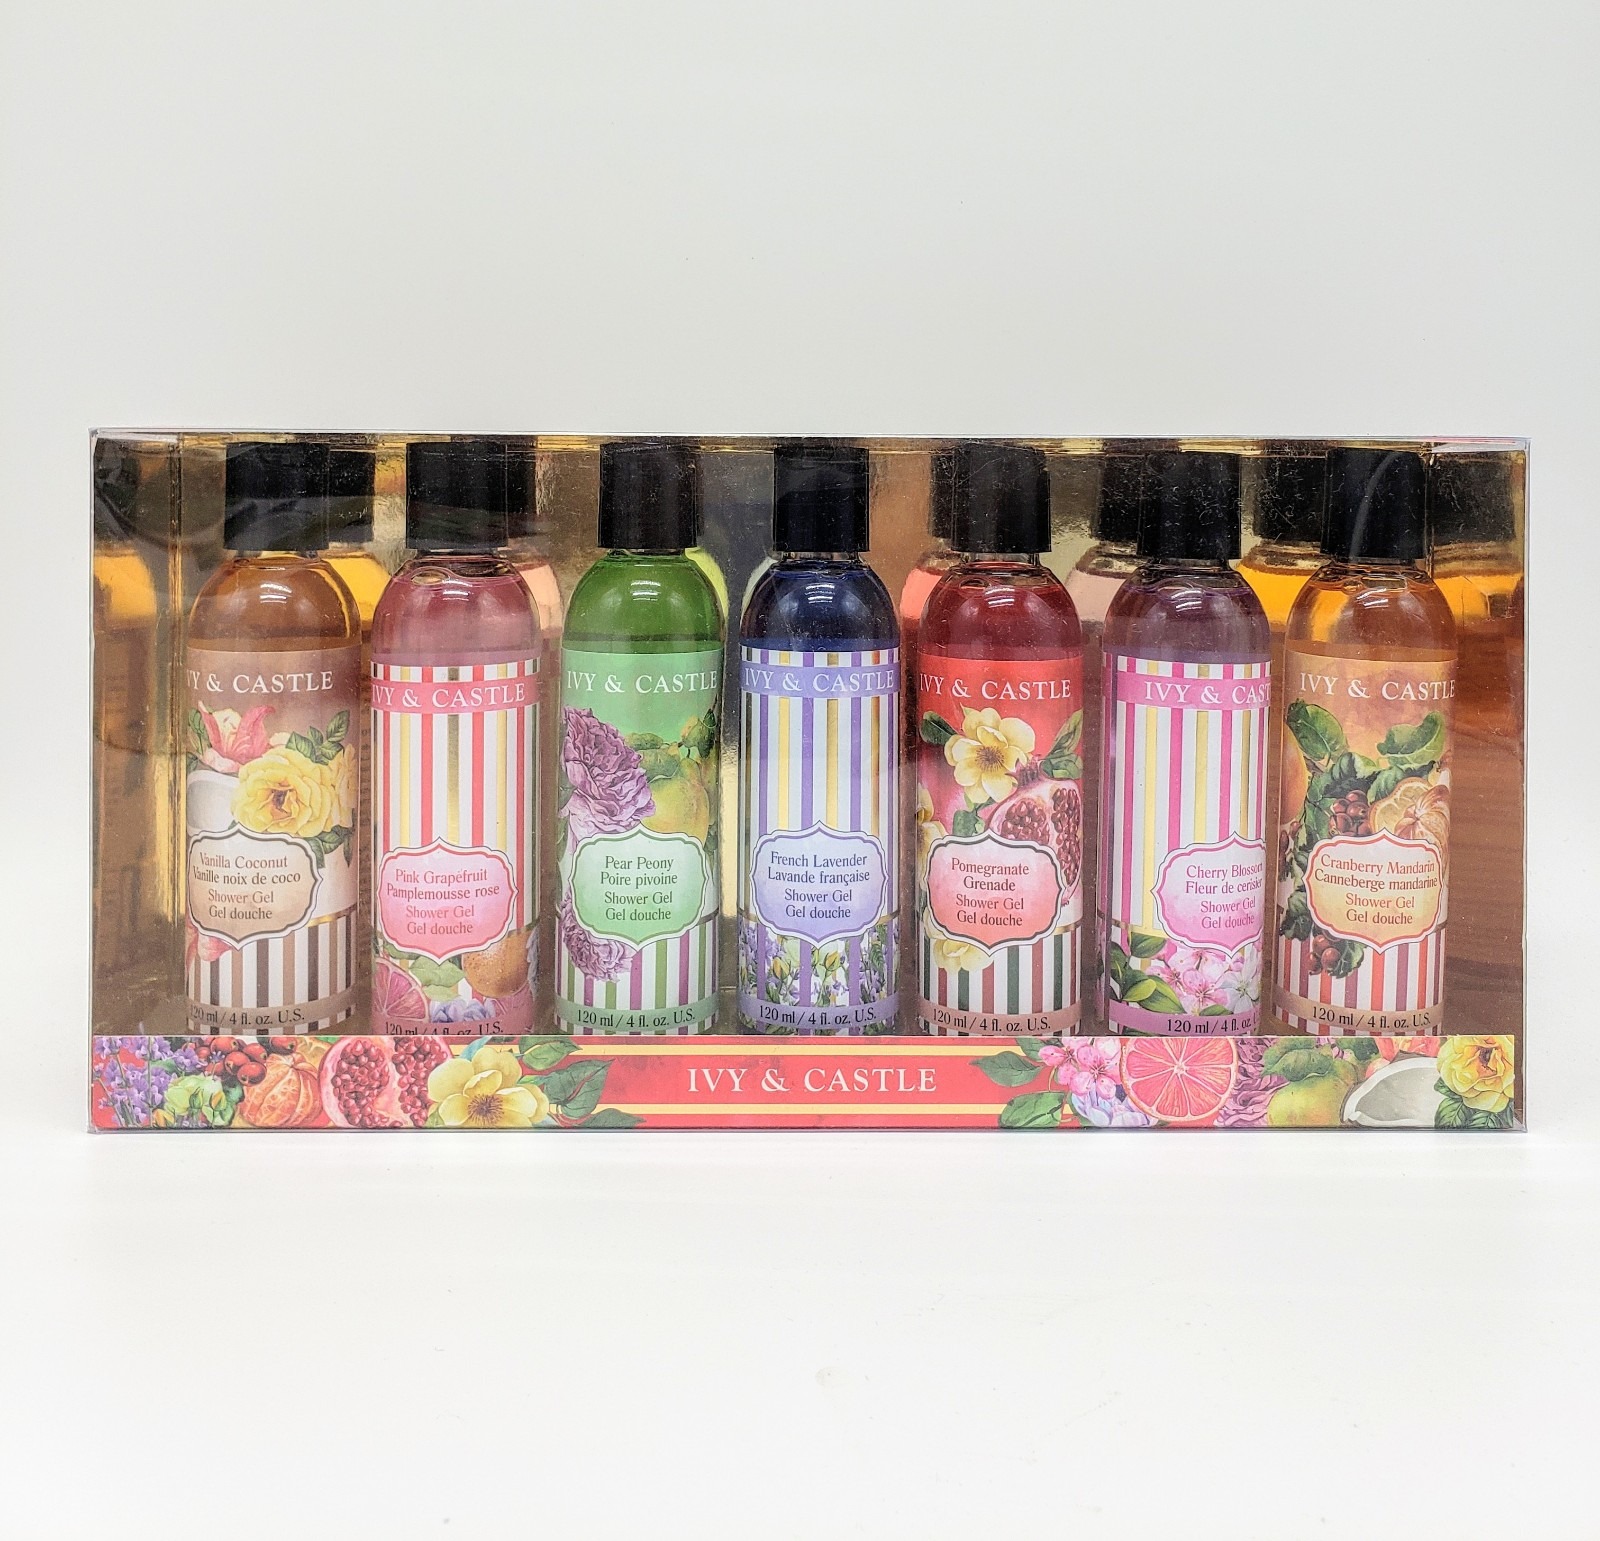 IVY & CASTLE SHOWER GEL COLLECTION - Lotus Gallery